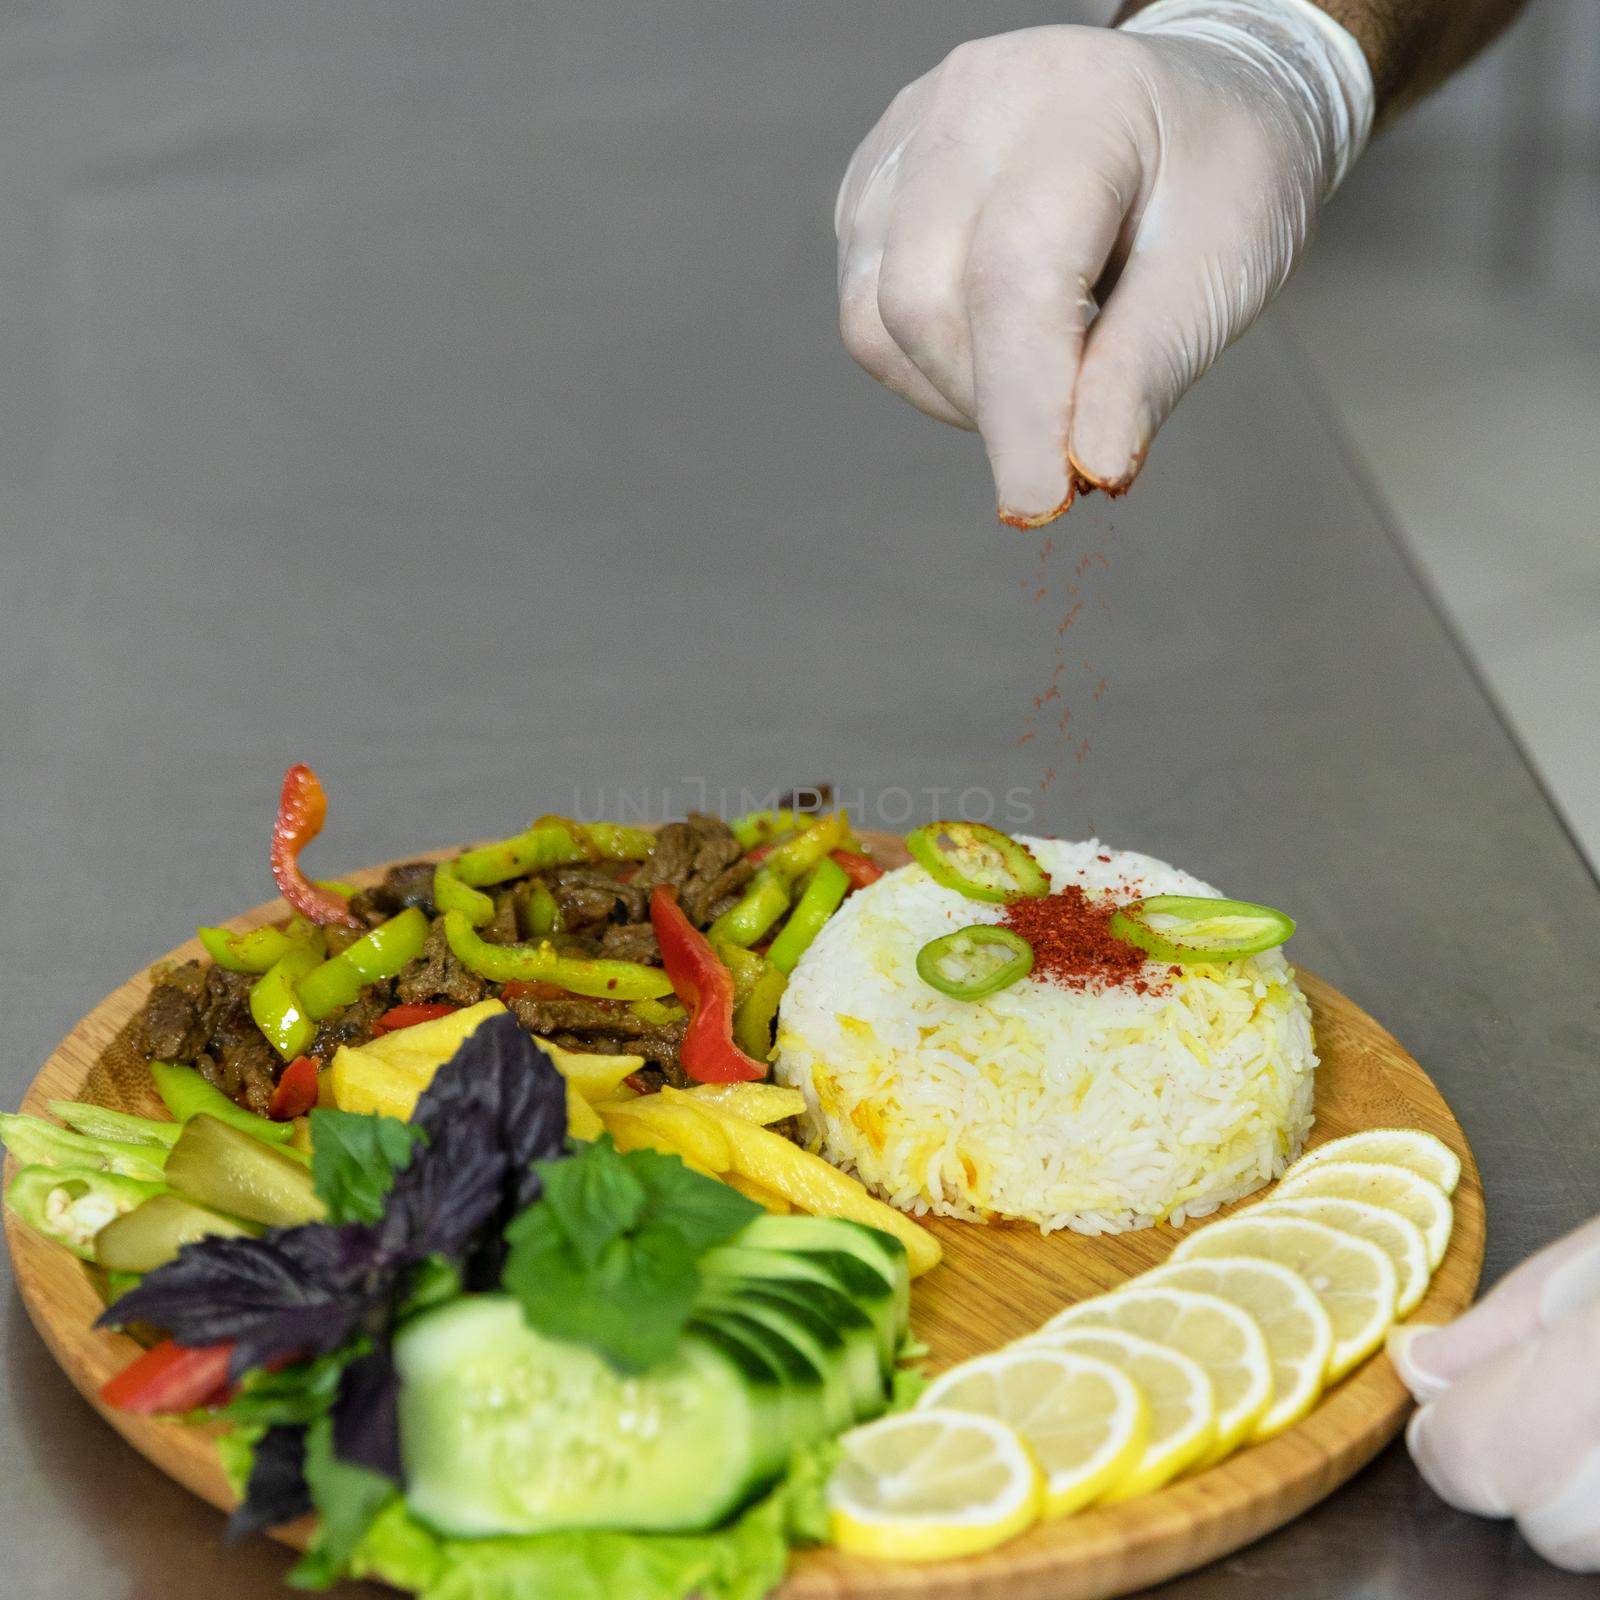 Restaurant chef pouring pepper to a salad meat meal